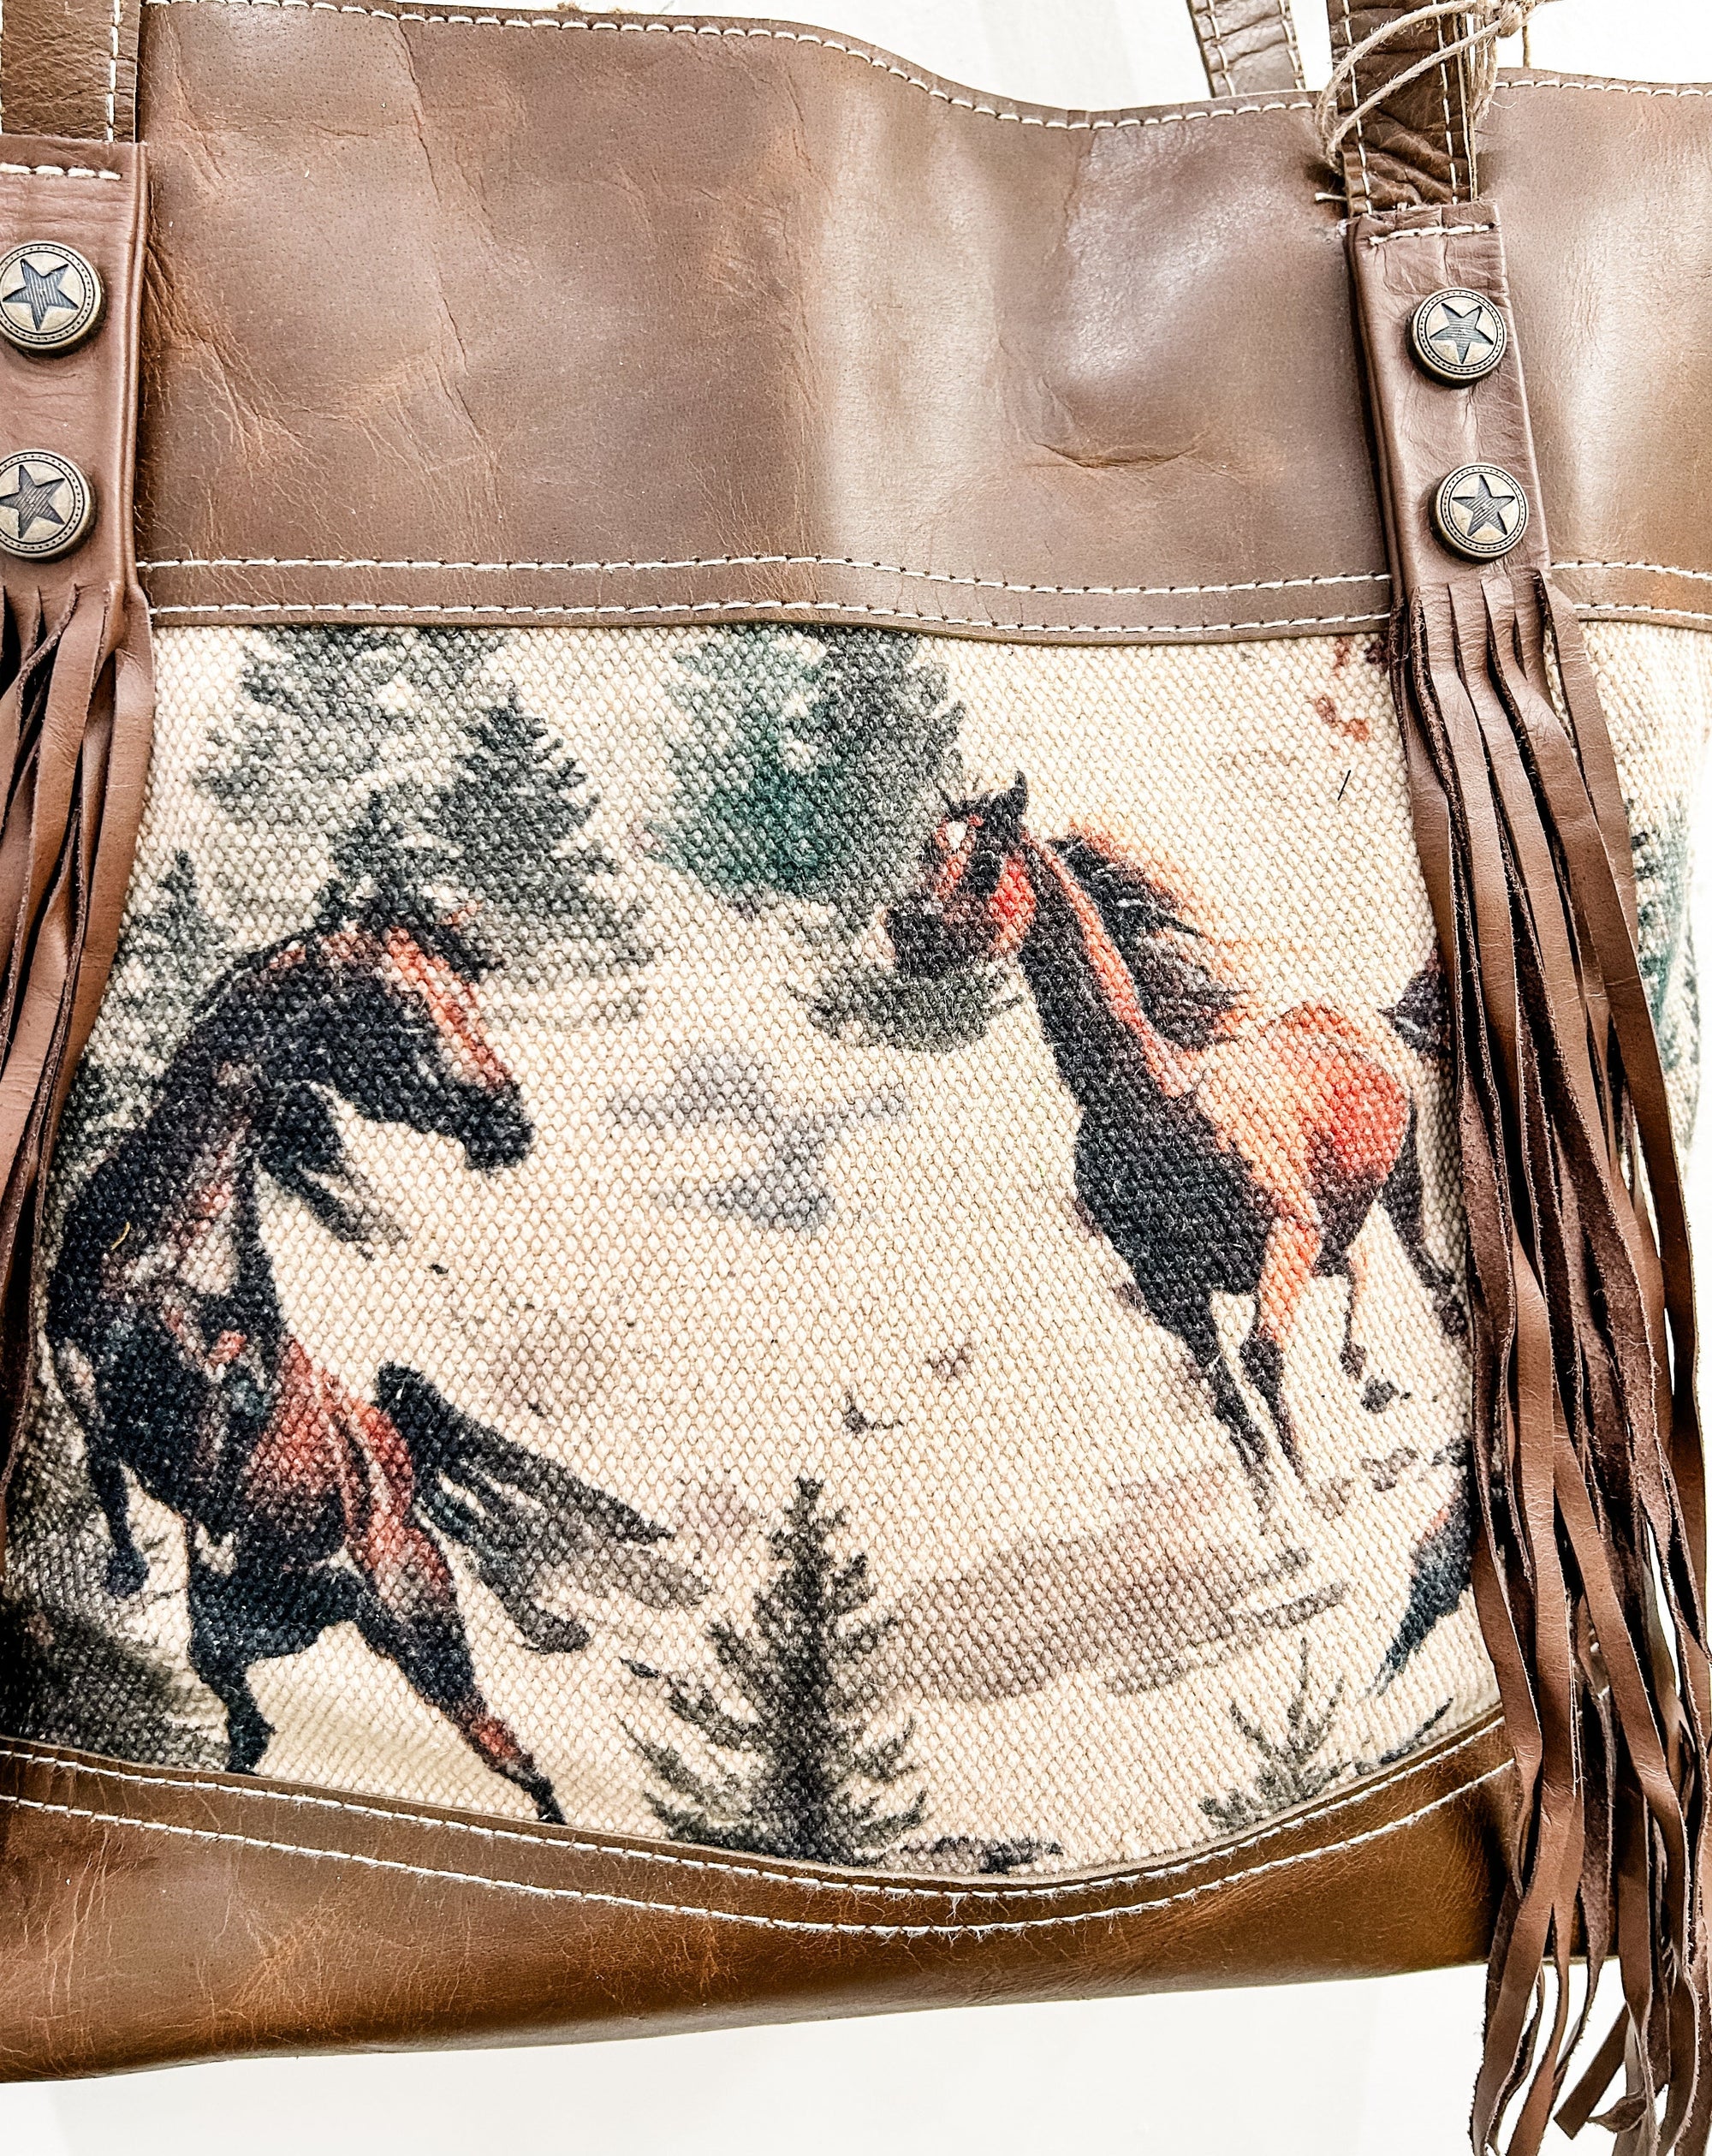 Wild Mustang Tote